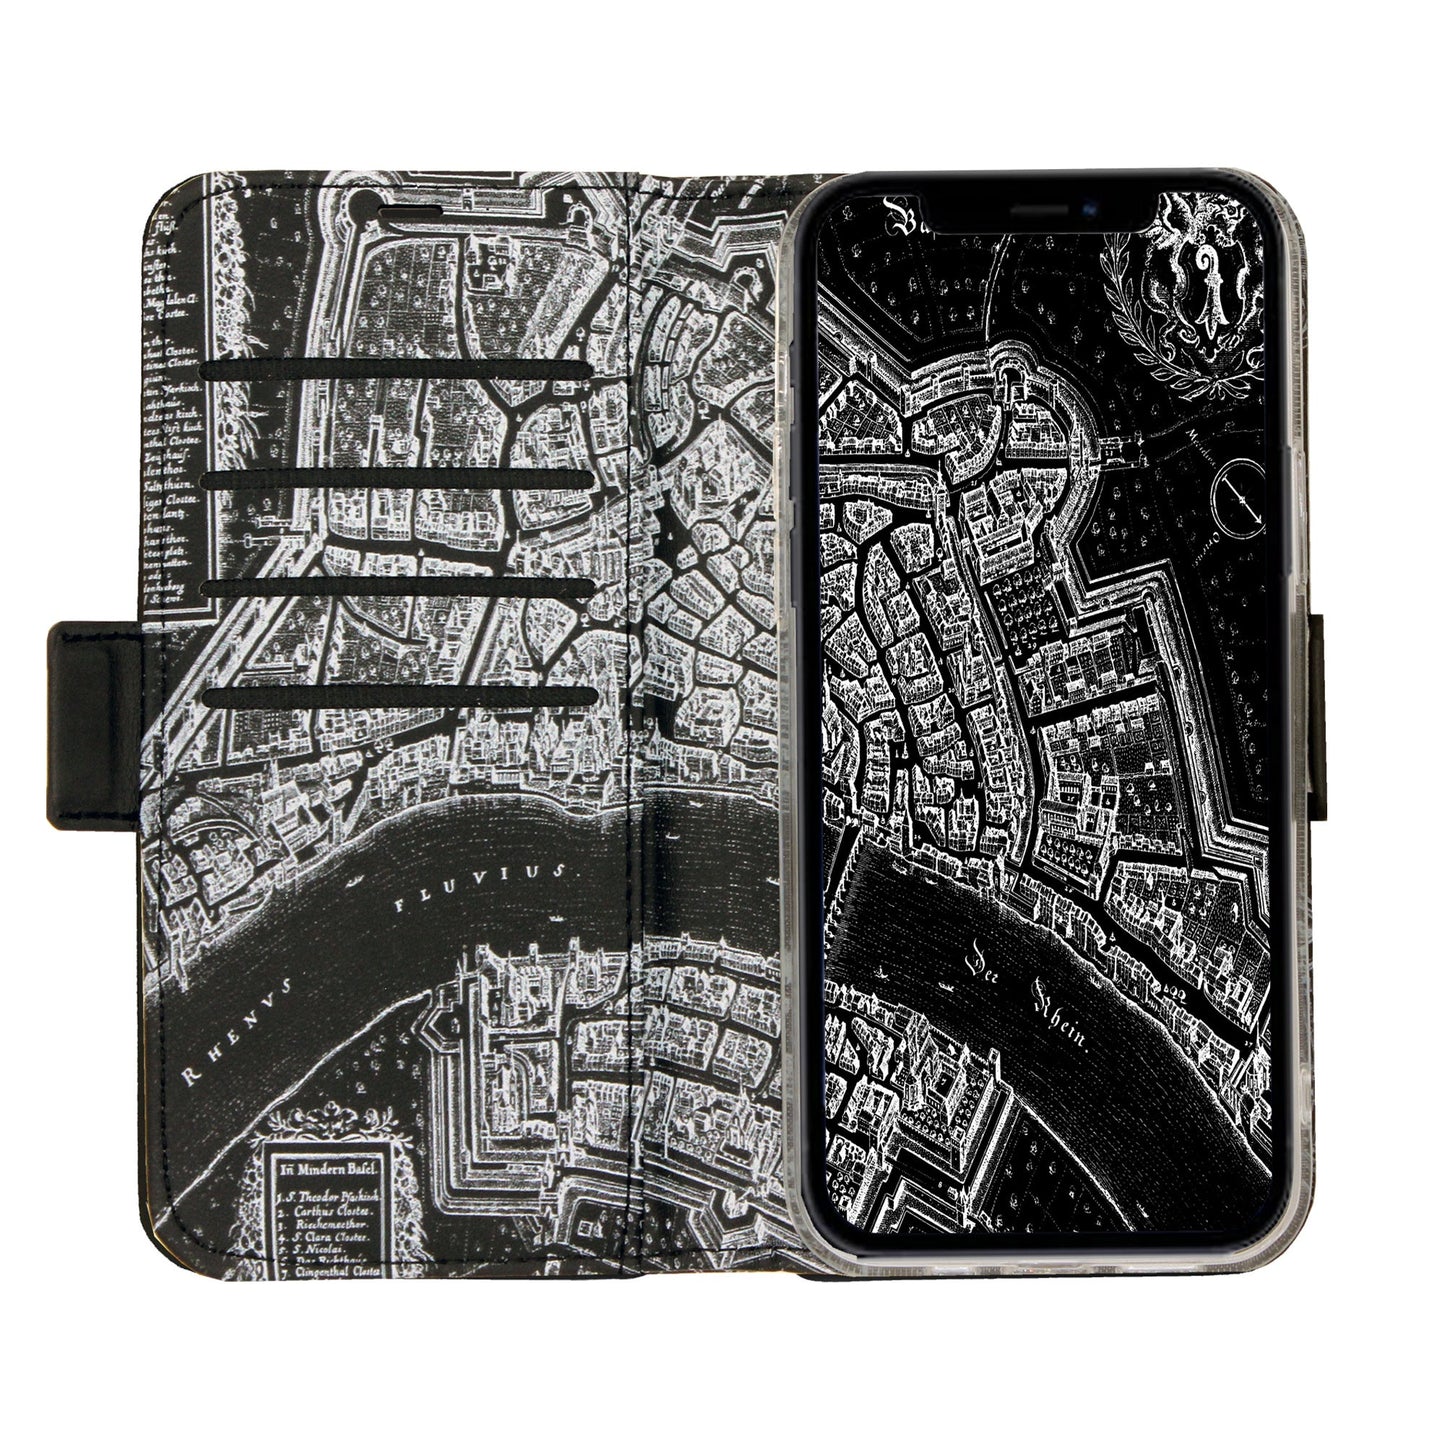 Basel Merian Negative Victor Case for iPhone 12 Pro Max